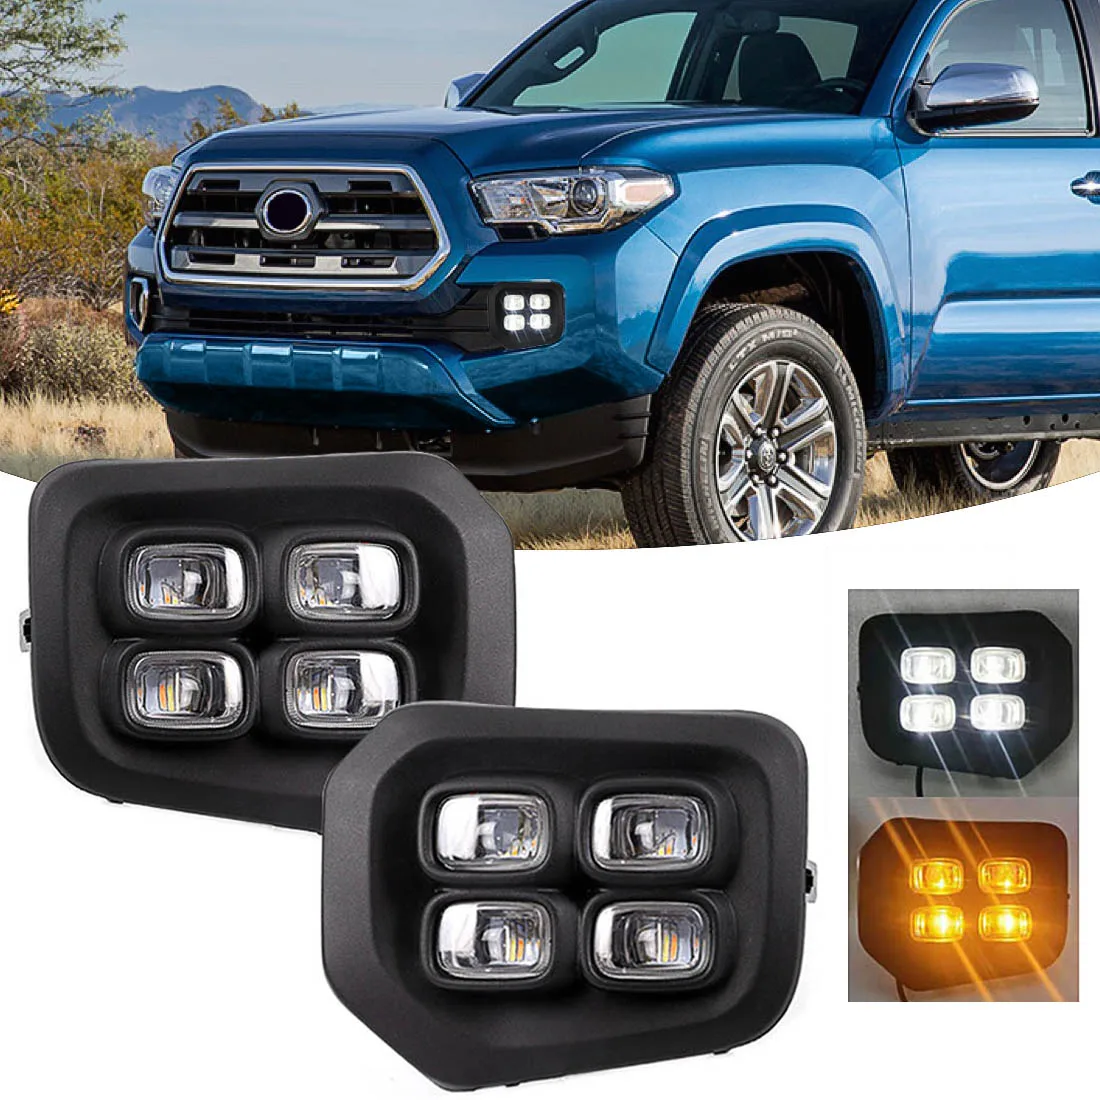 Led Daytime Running Light Fog Lamp for Toyota Tacoma DRL 2016 2017 2018 2019 2020 Bumper Driving White Yellow Waterproof